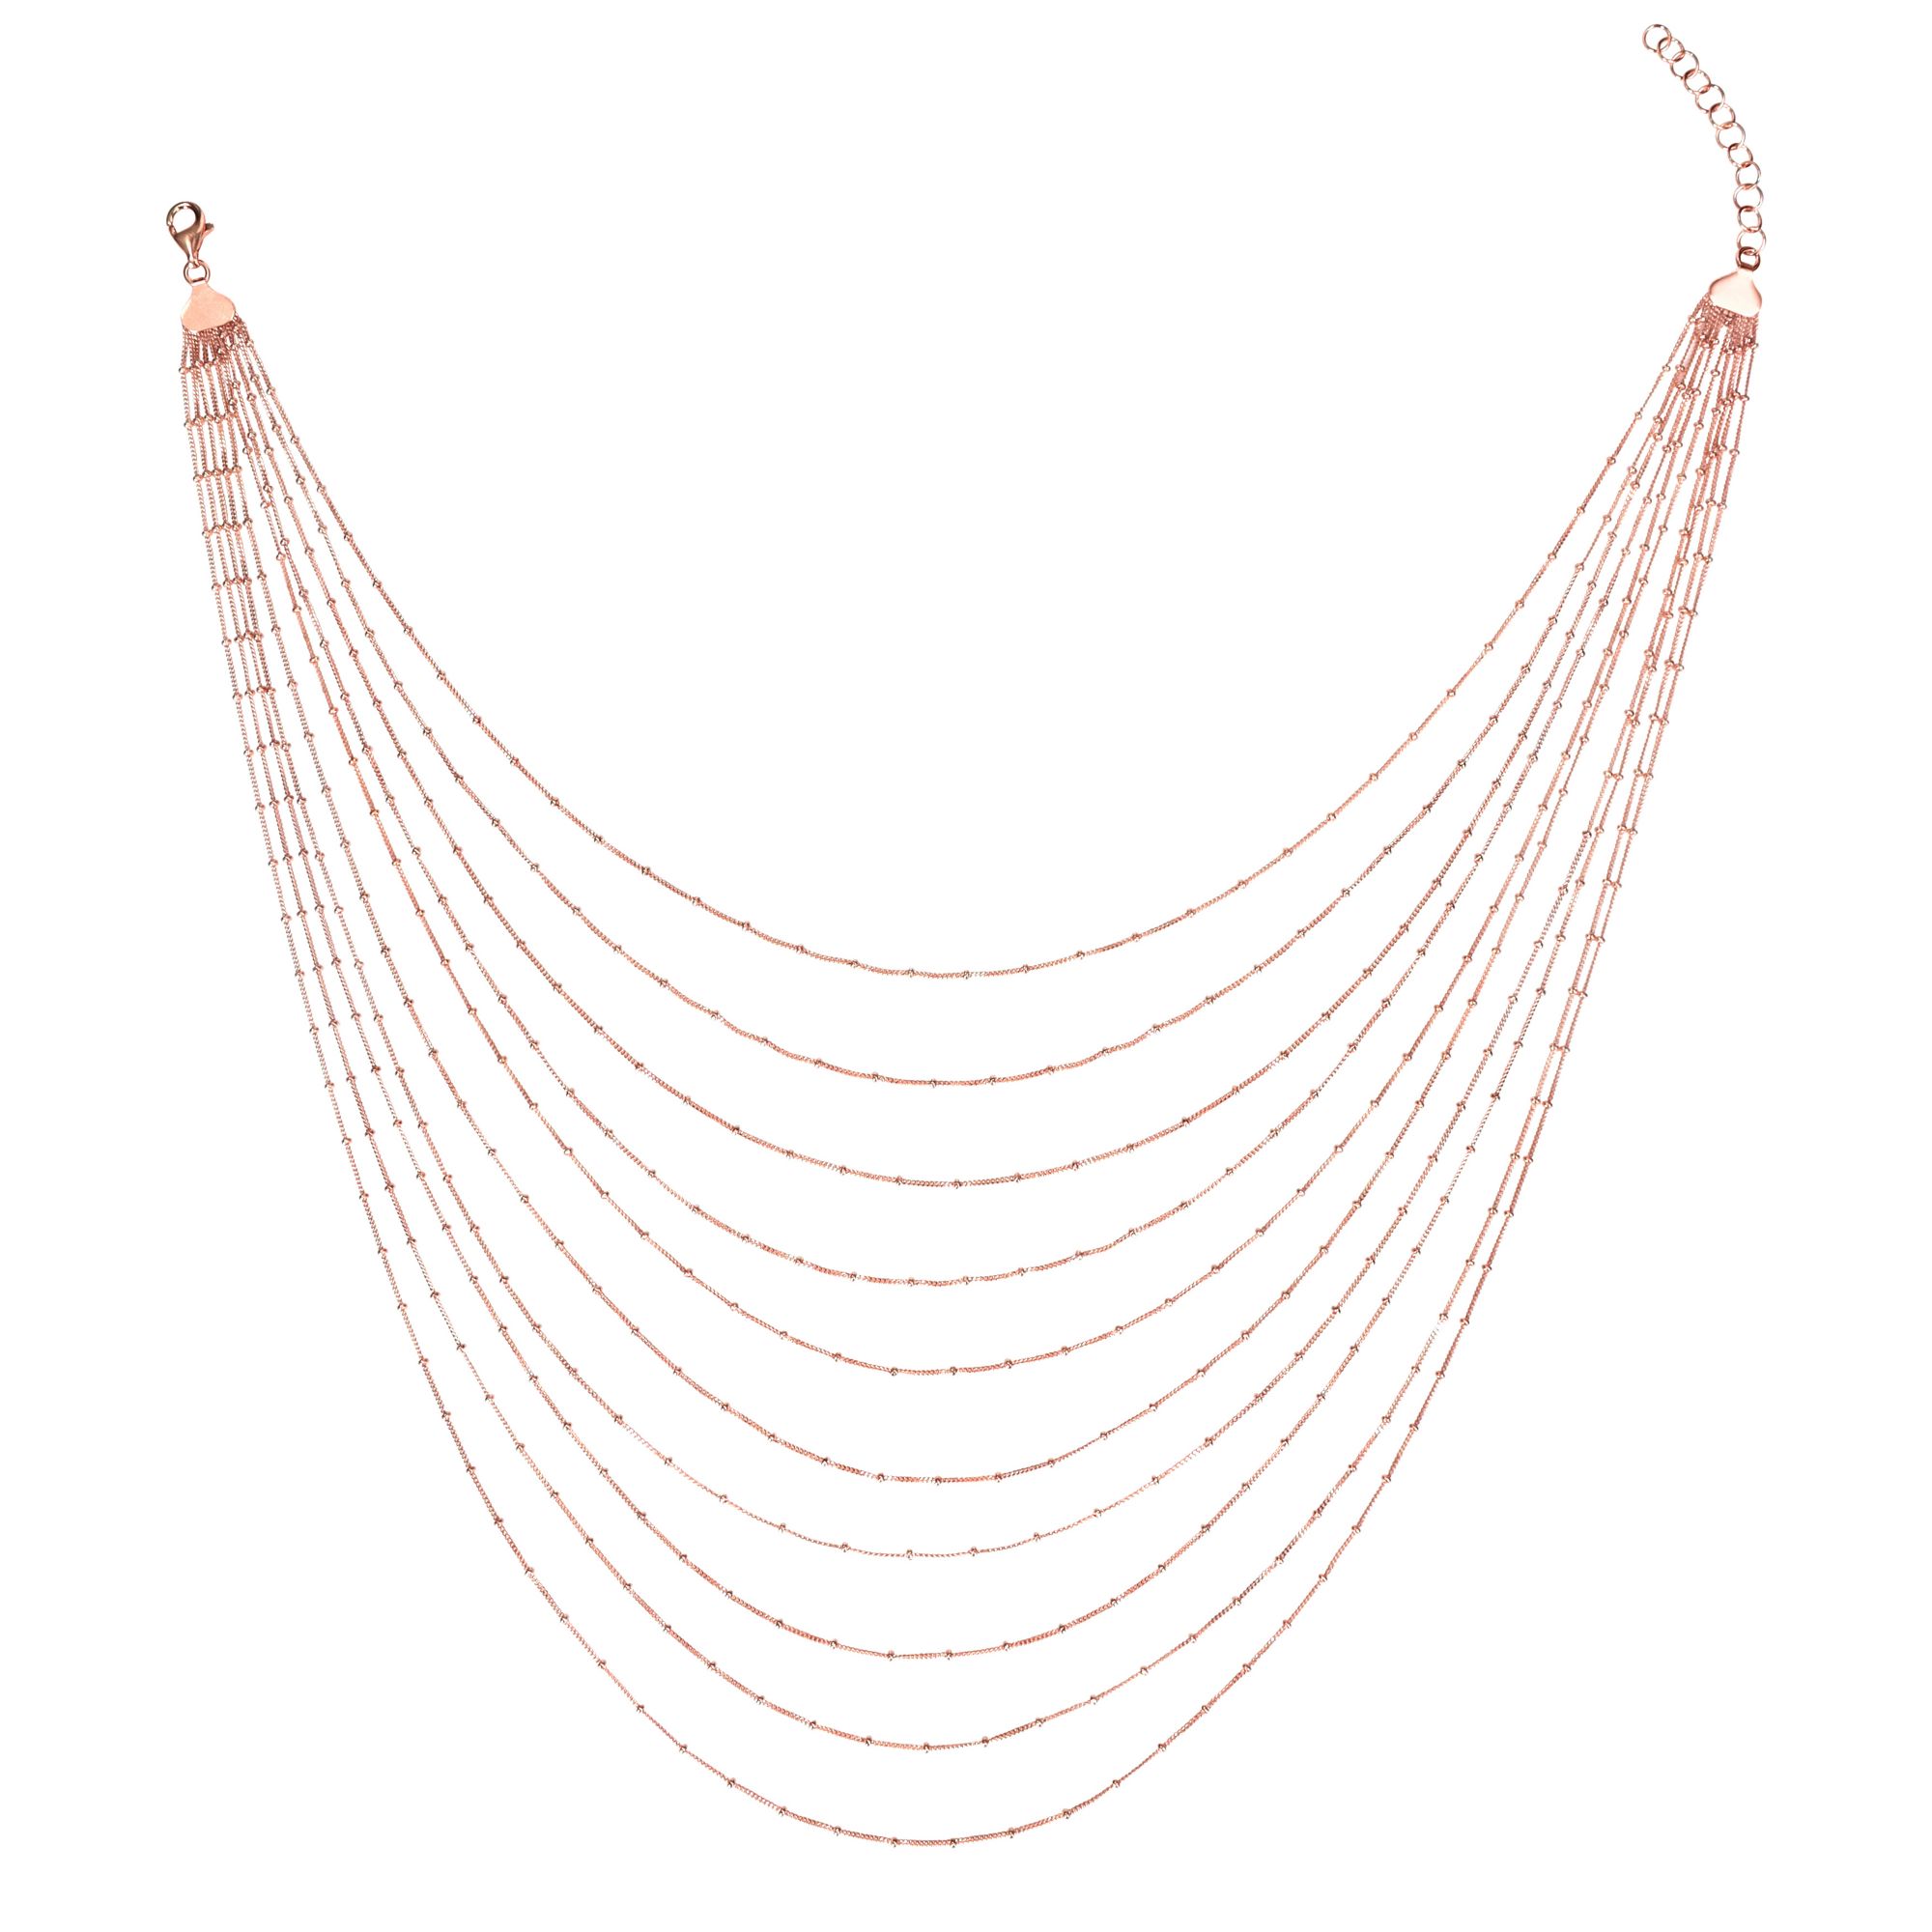 Multi-Strand Chain Necklace in 18k Rose Gold Plated Silver